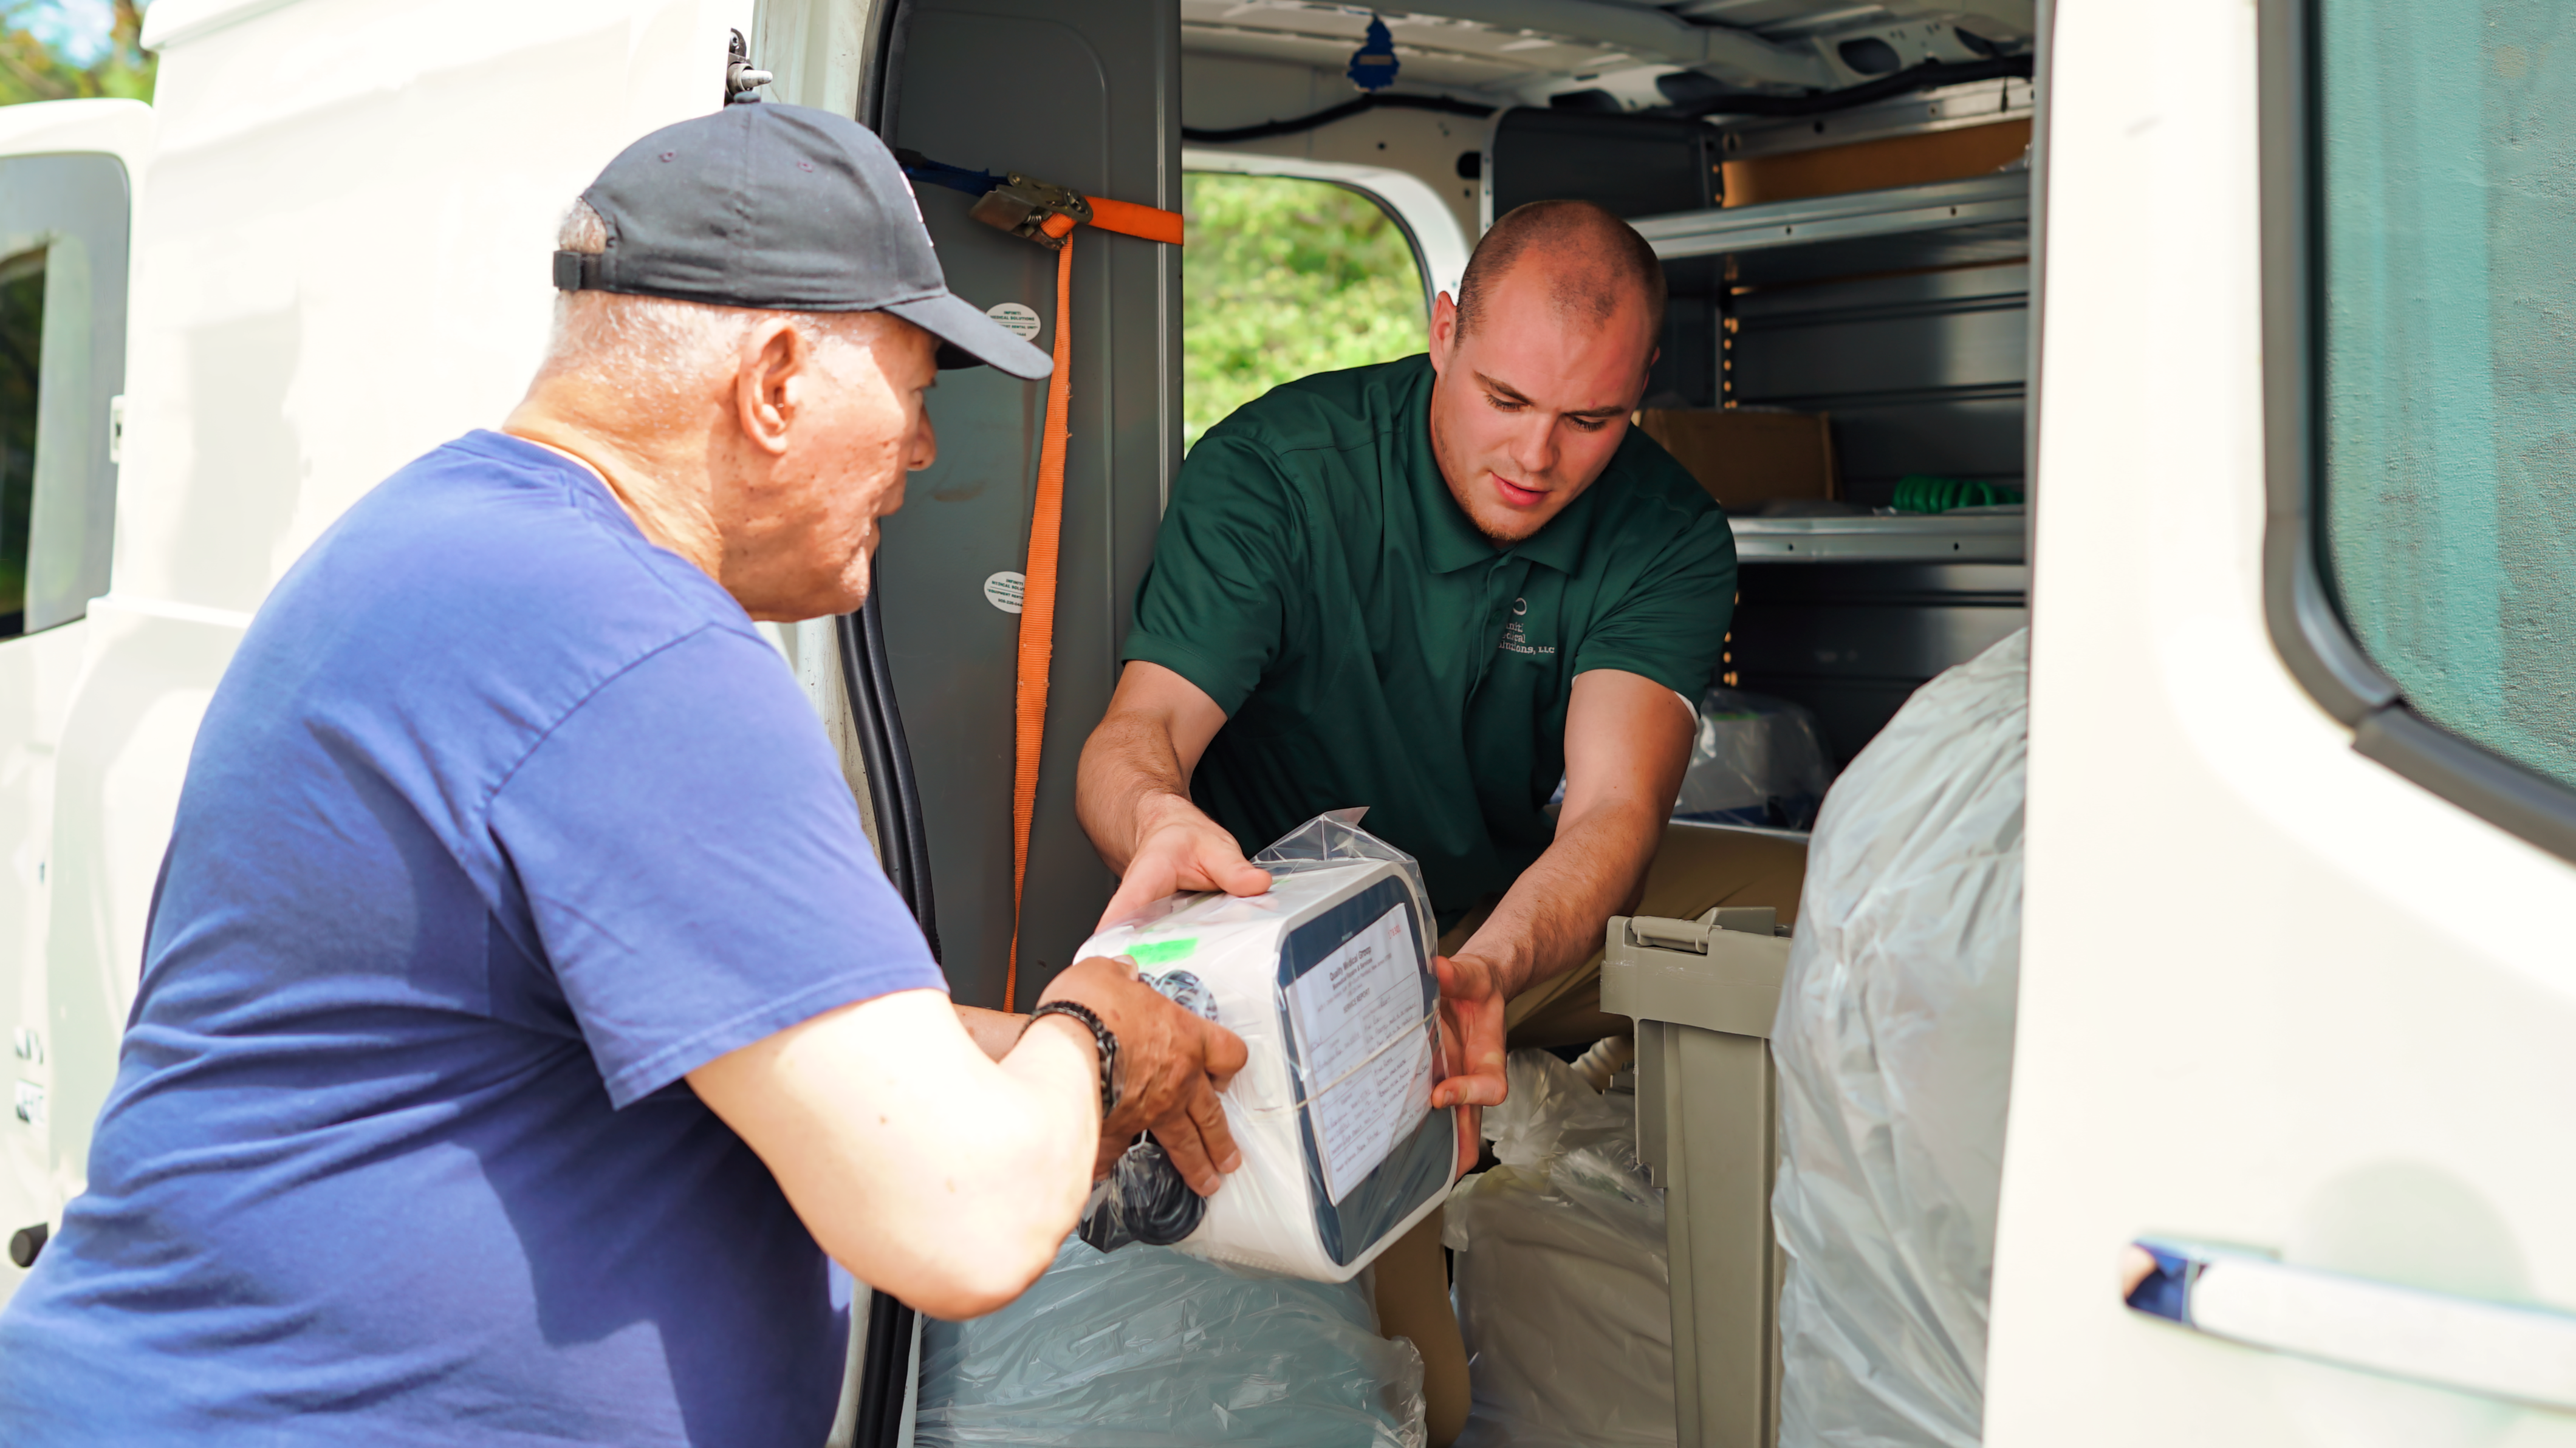 Medical Equipment Repair Companies: What to Look For in Providers